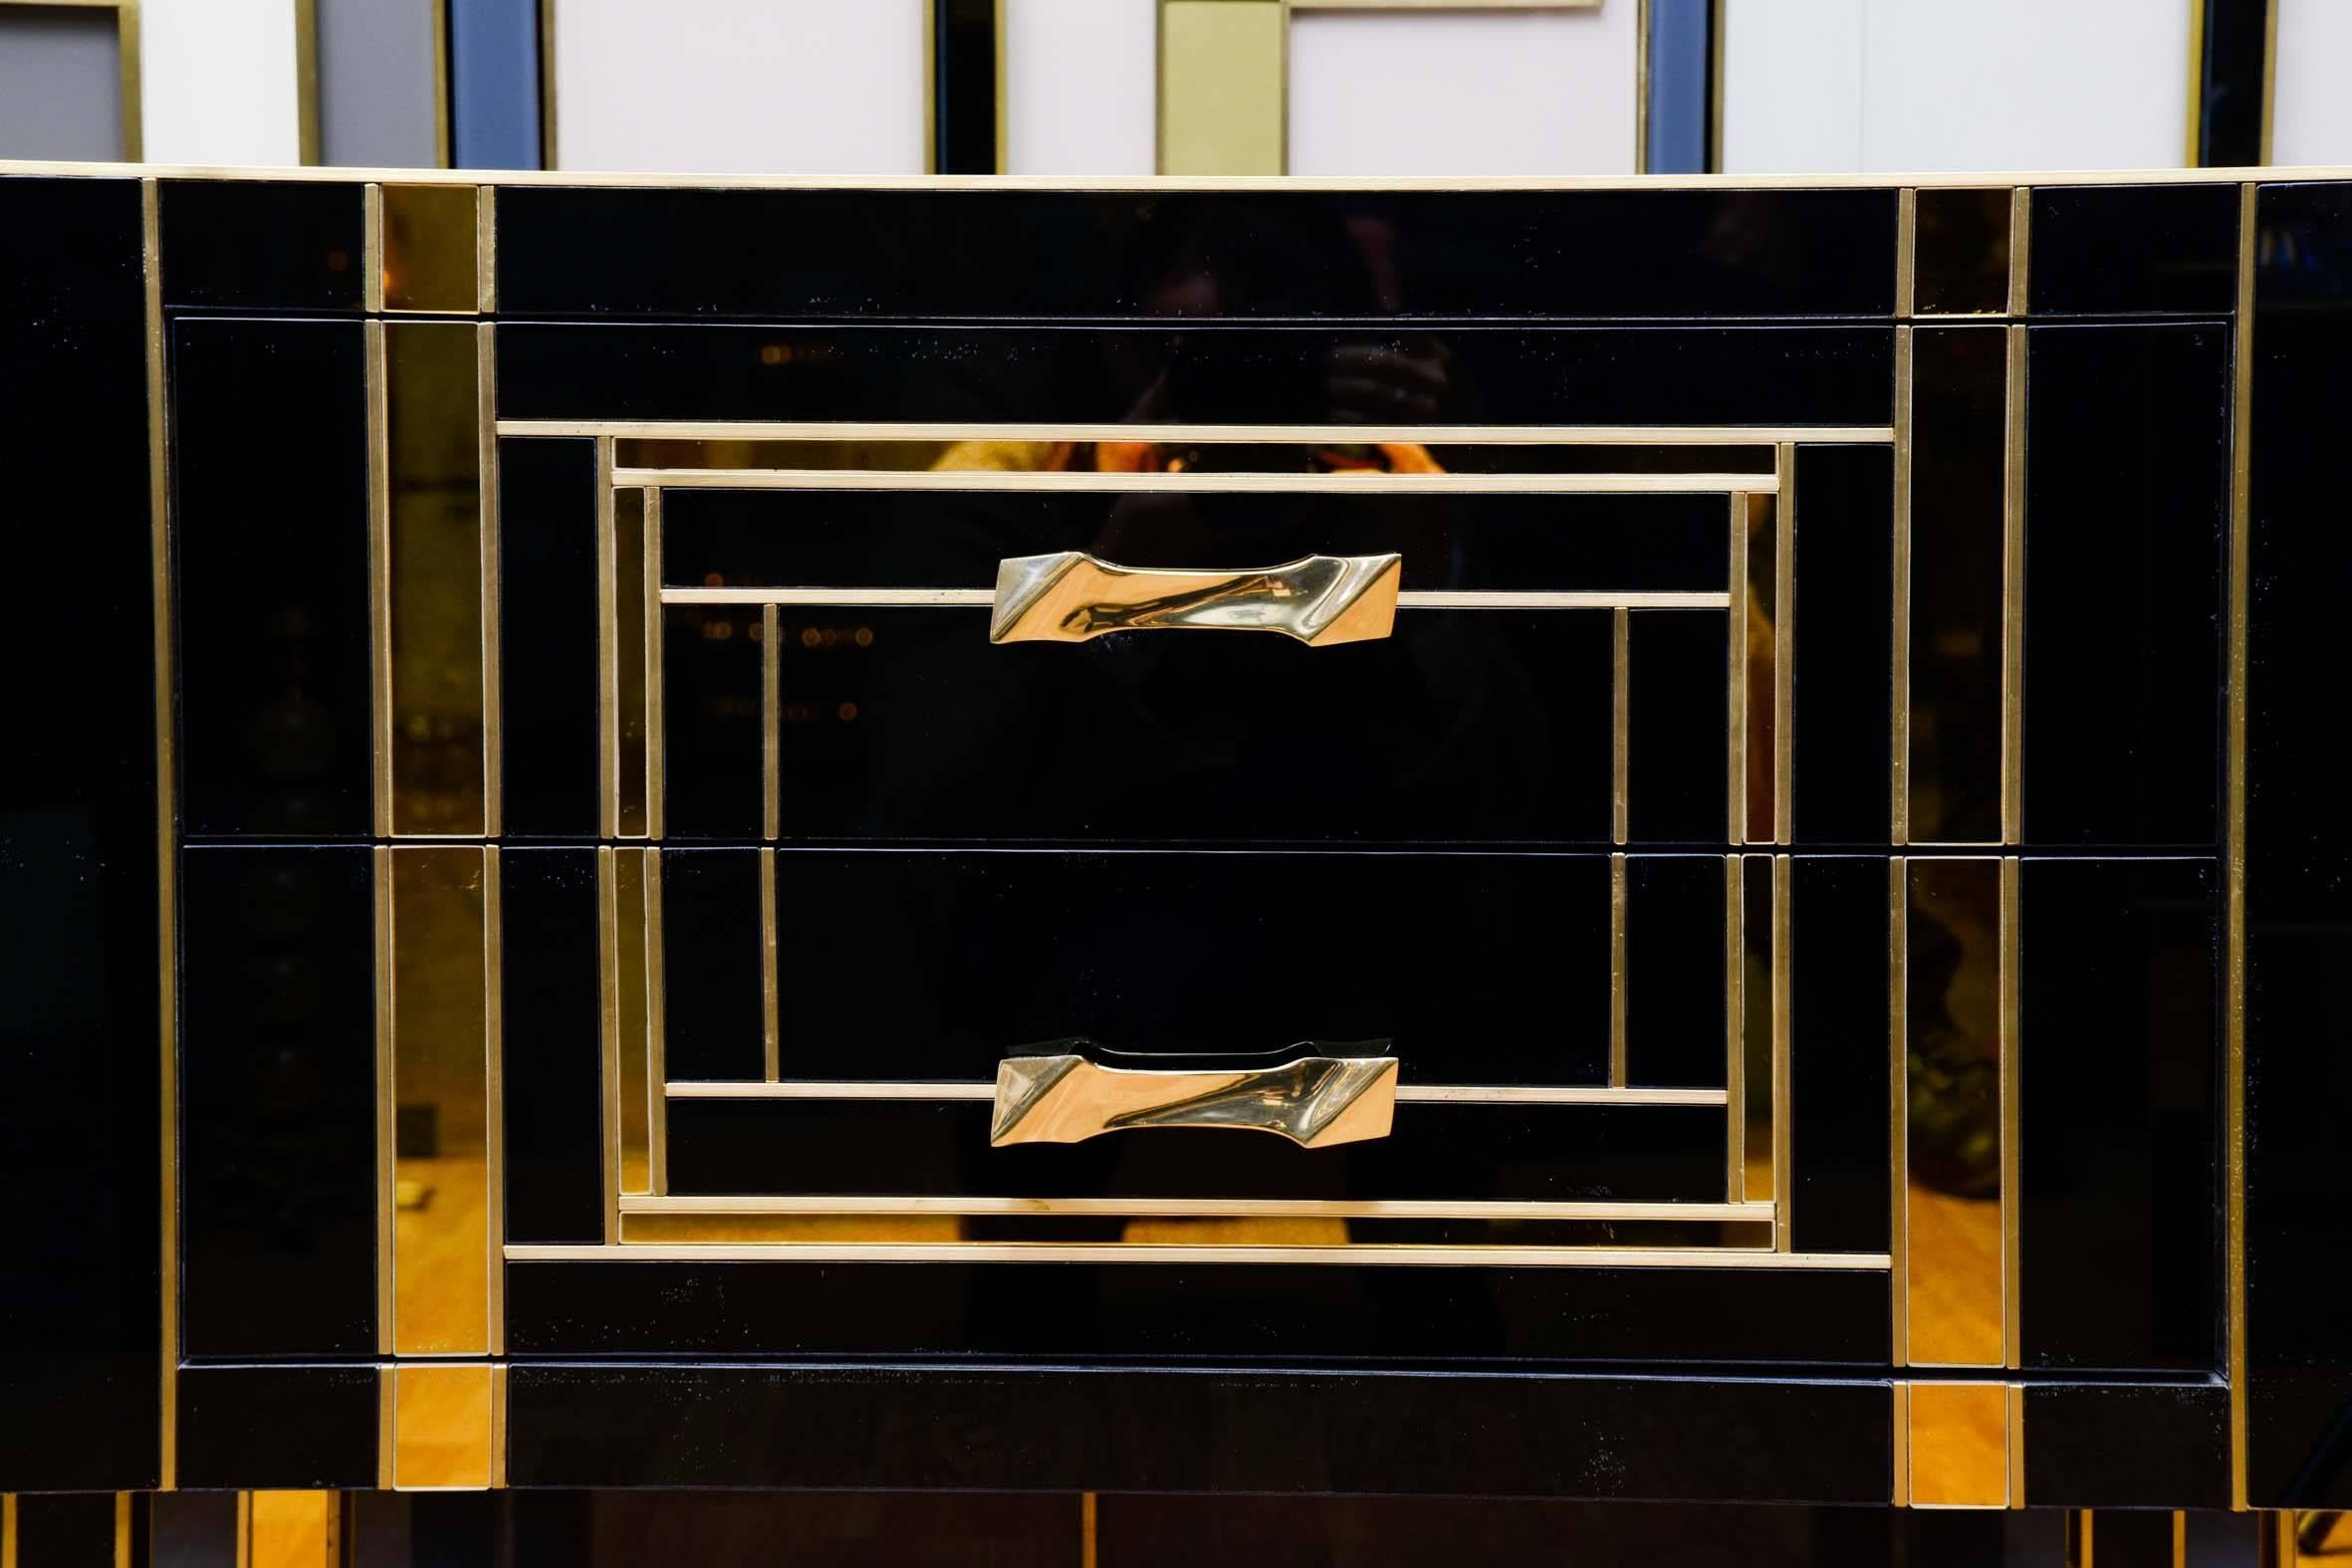 Spanish Pair of Nightstands in Tinted Glass, Exclusive Design Made for Justine